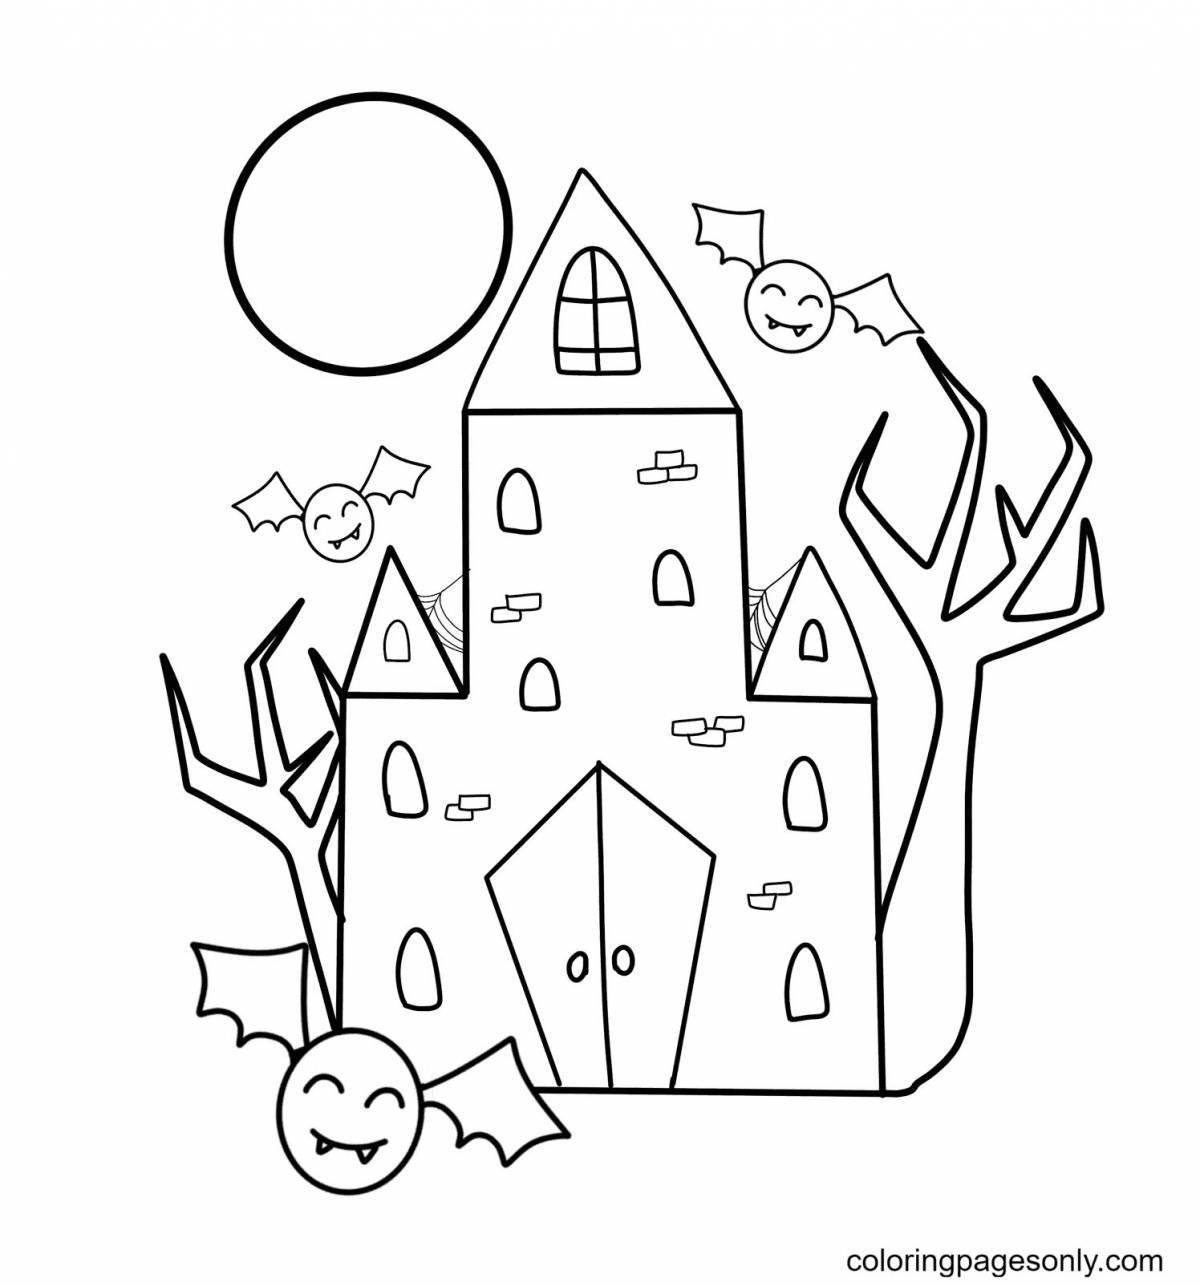 Royal coloring book for girls with houses and castles